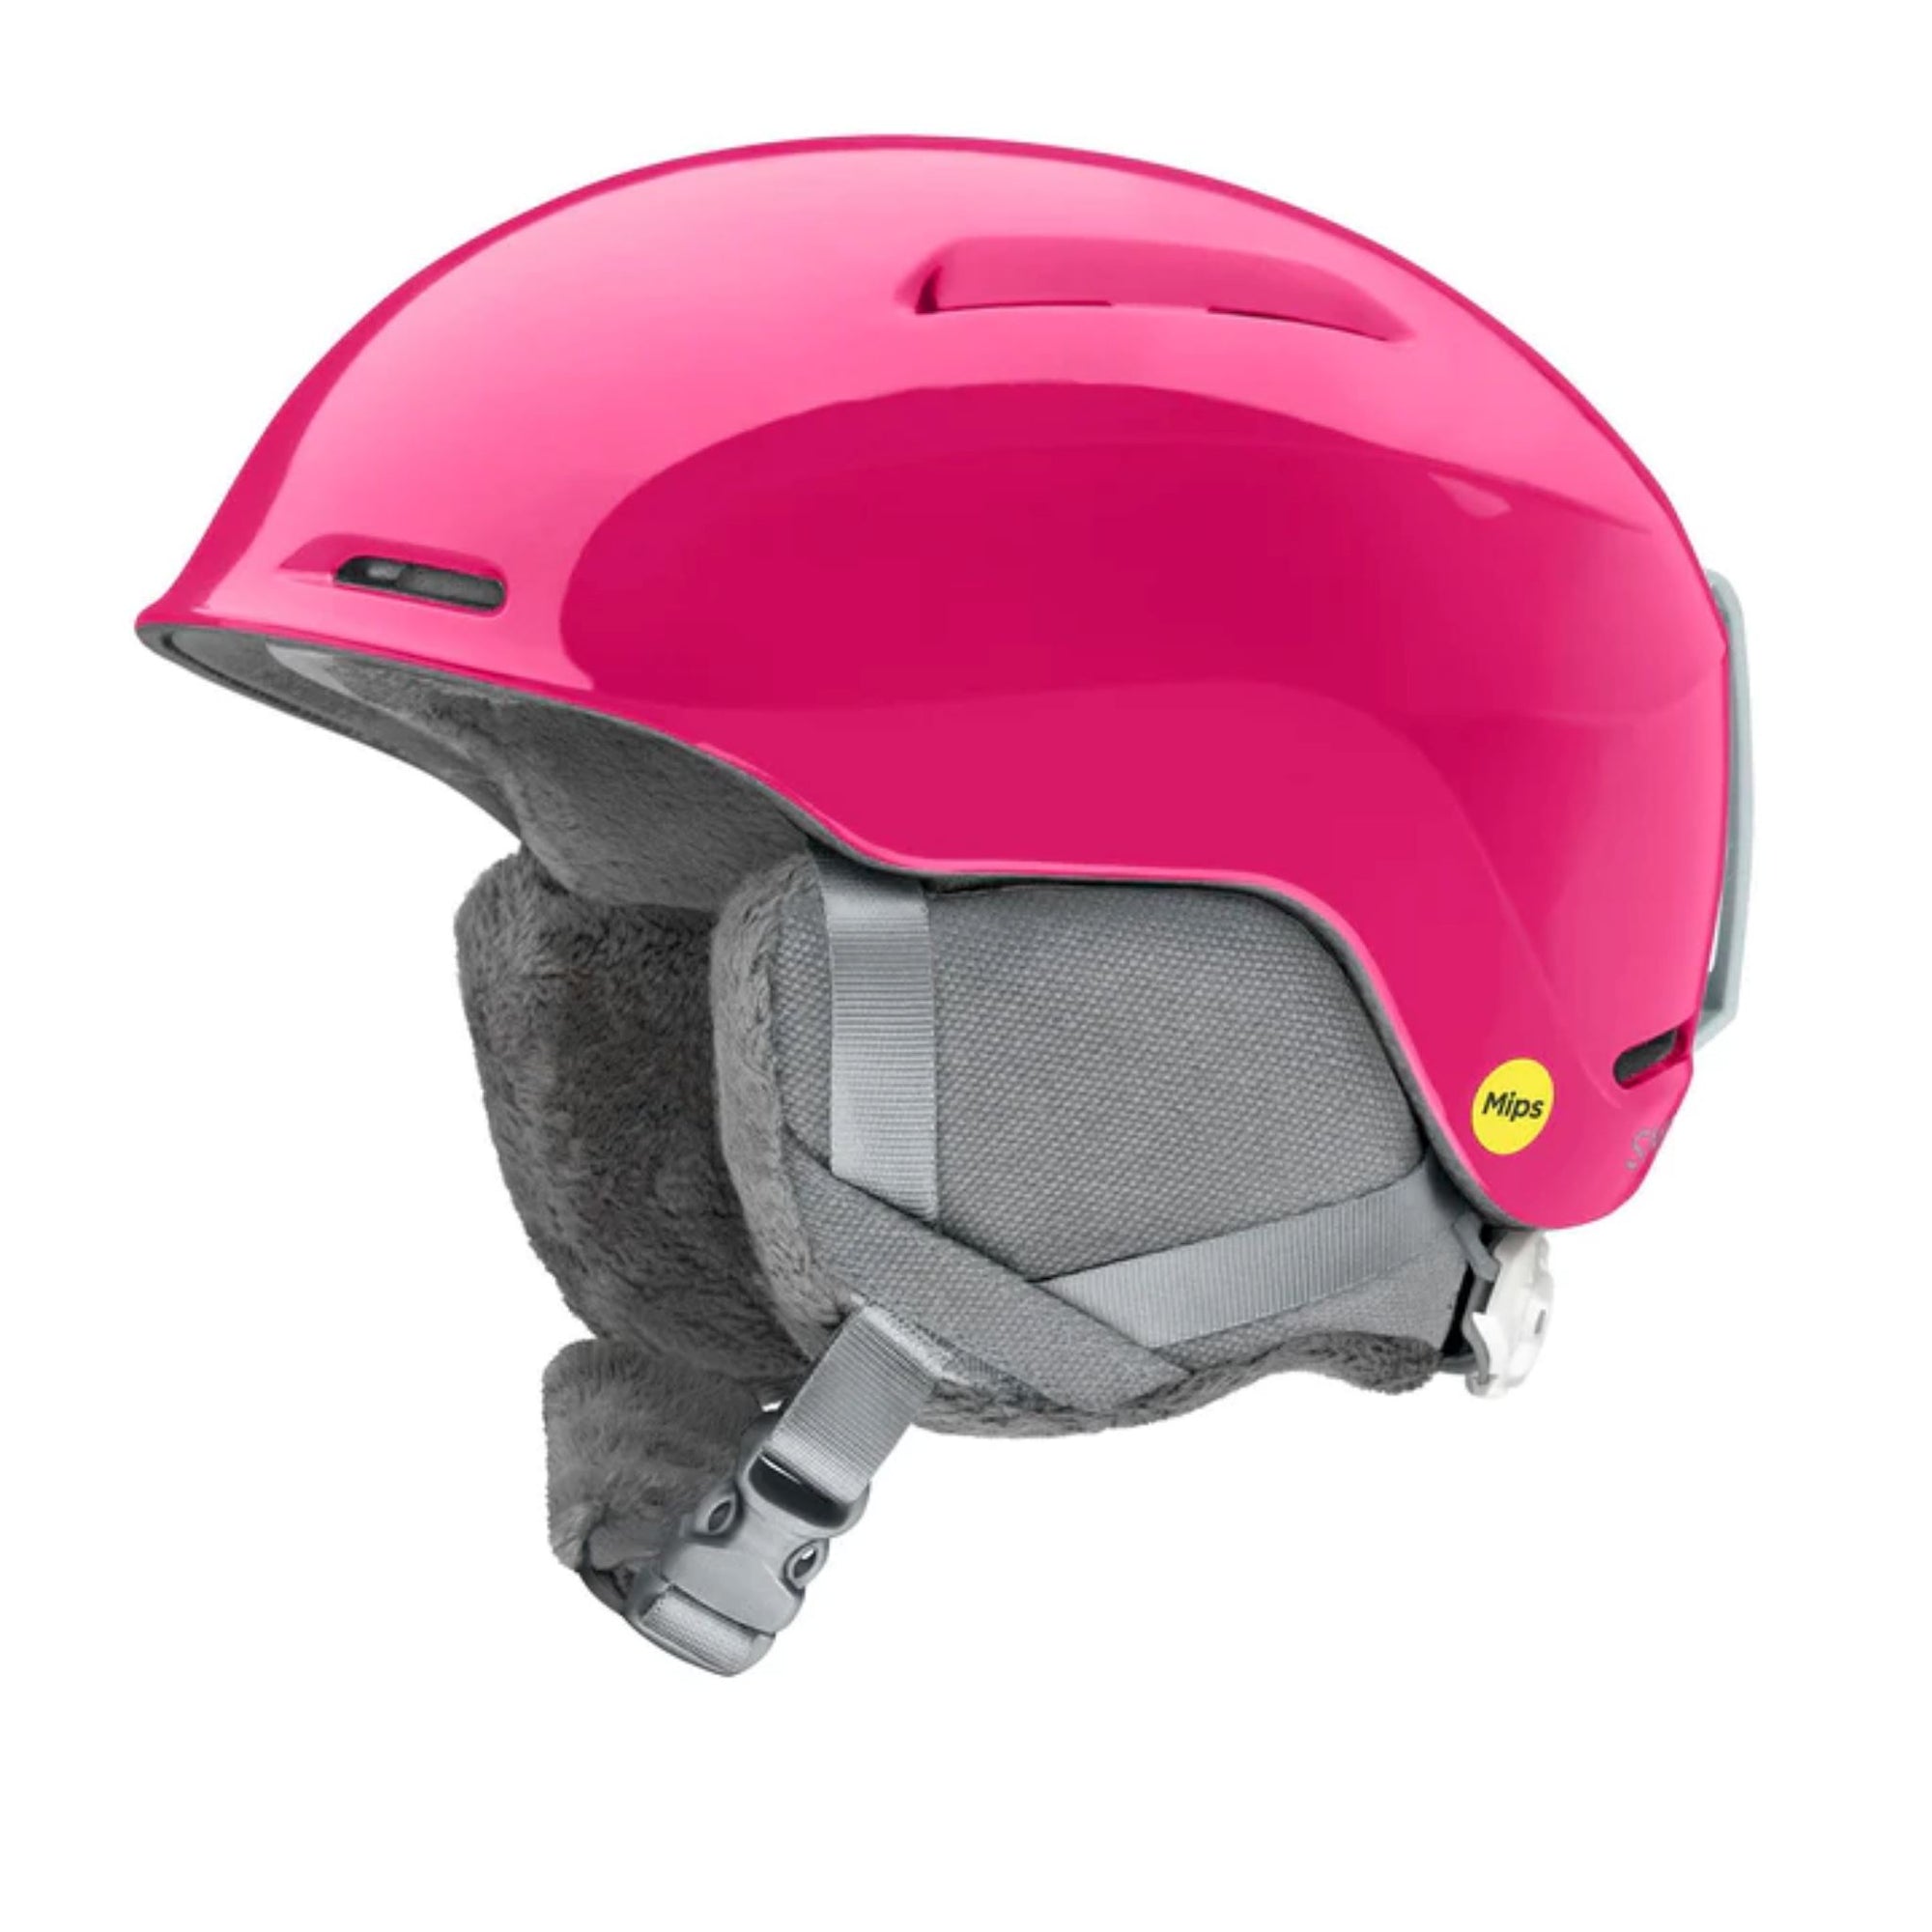 Kid Smith Glide Jr. MIPS Helmet - Lectric Flamingo Helmets Smith Youth Extra Small (48-52CM) 